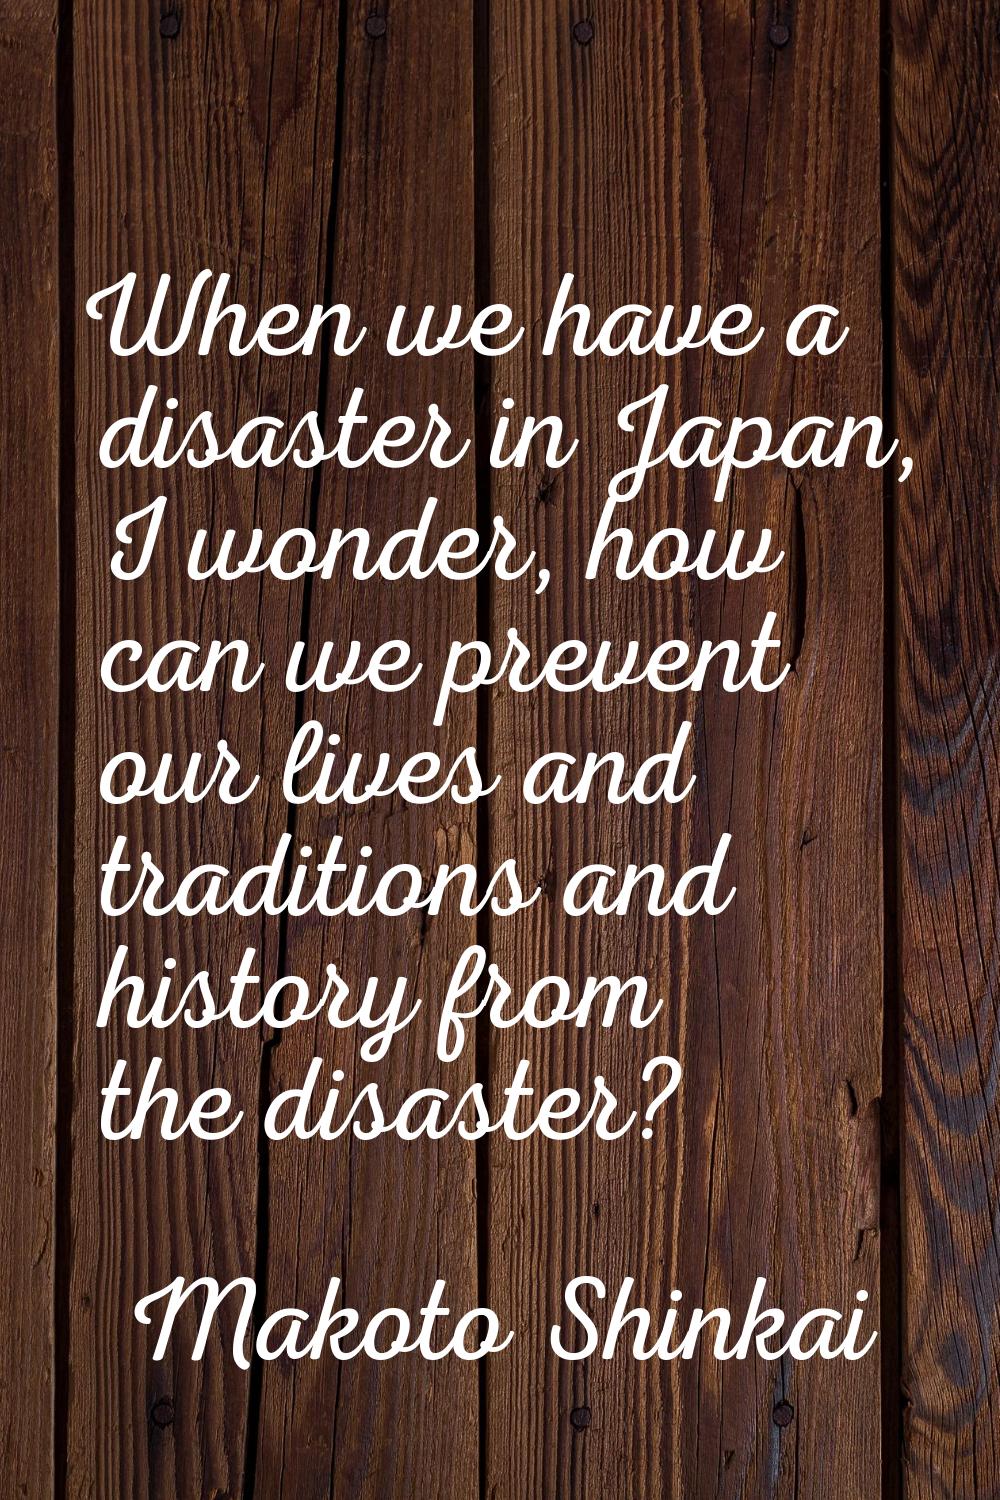 When we have a disaster in Japan, I wonder, how can we prevent our lives and traditions and history